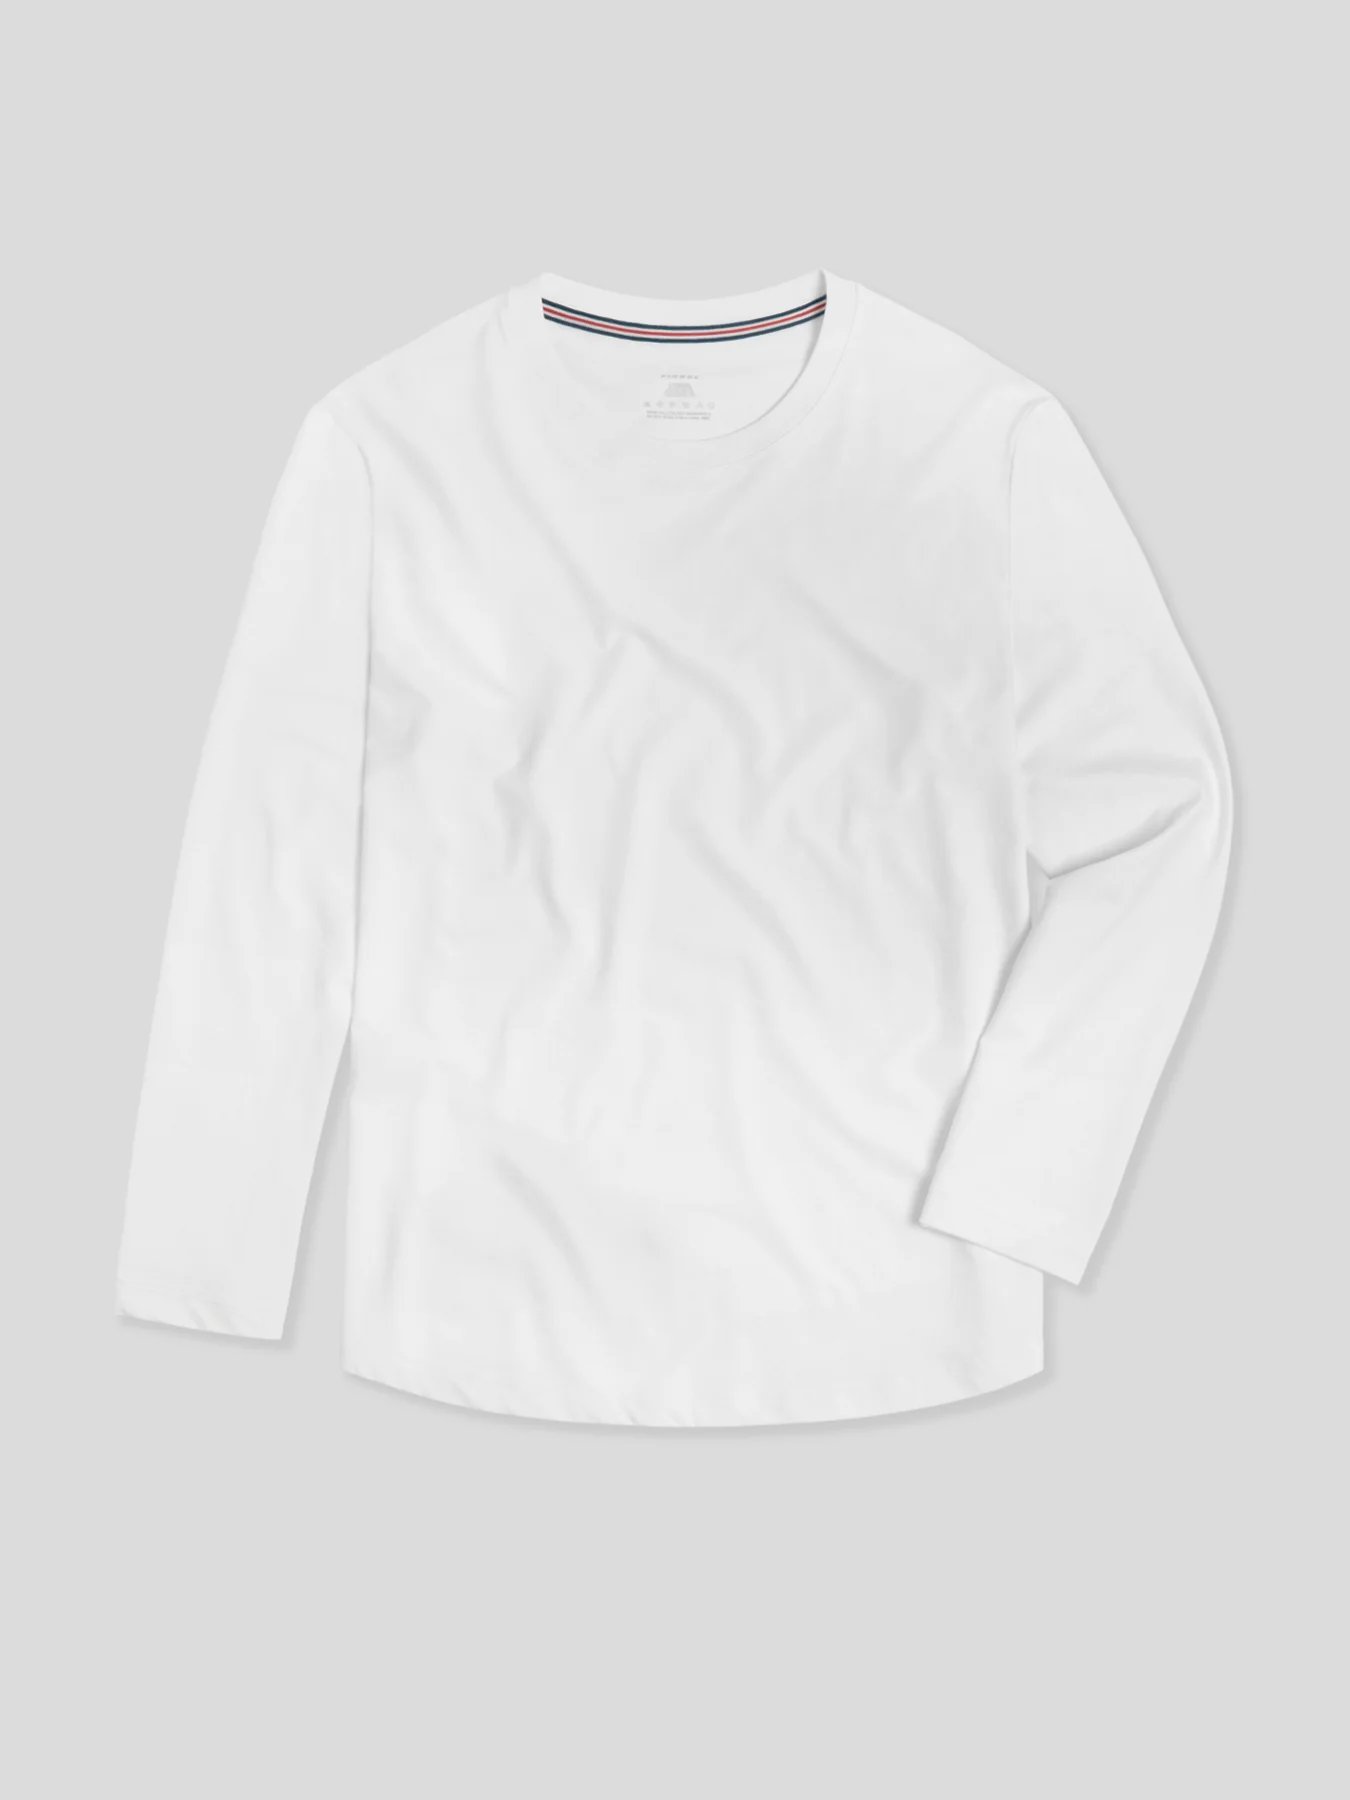 StaySmooth Long Sleeve Tee 3-Pack: Classic Fit